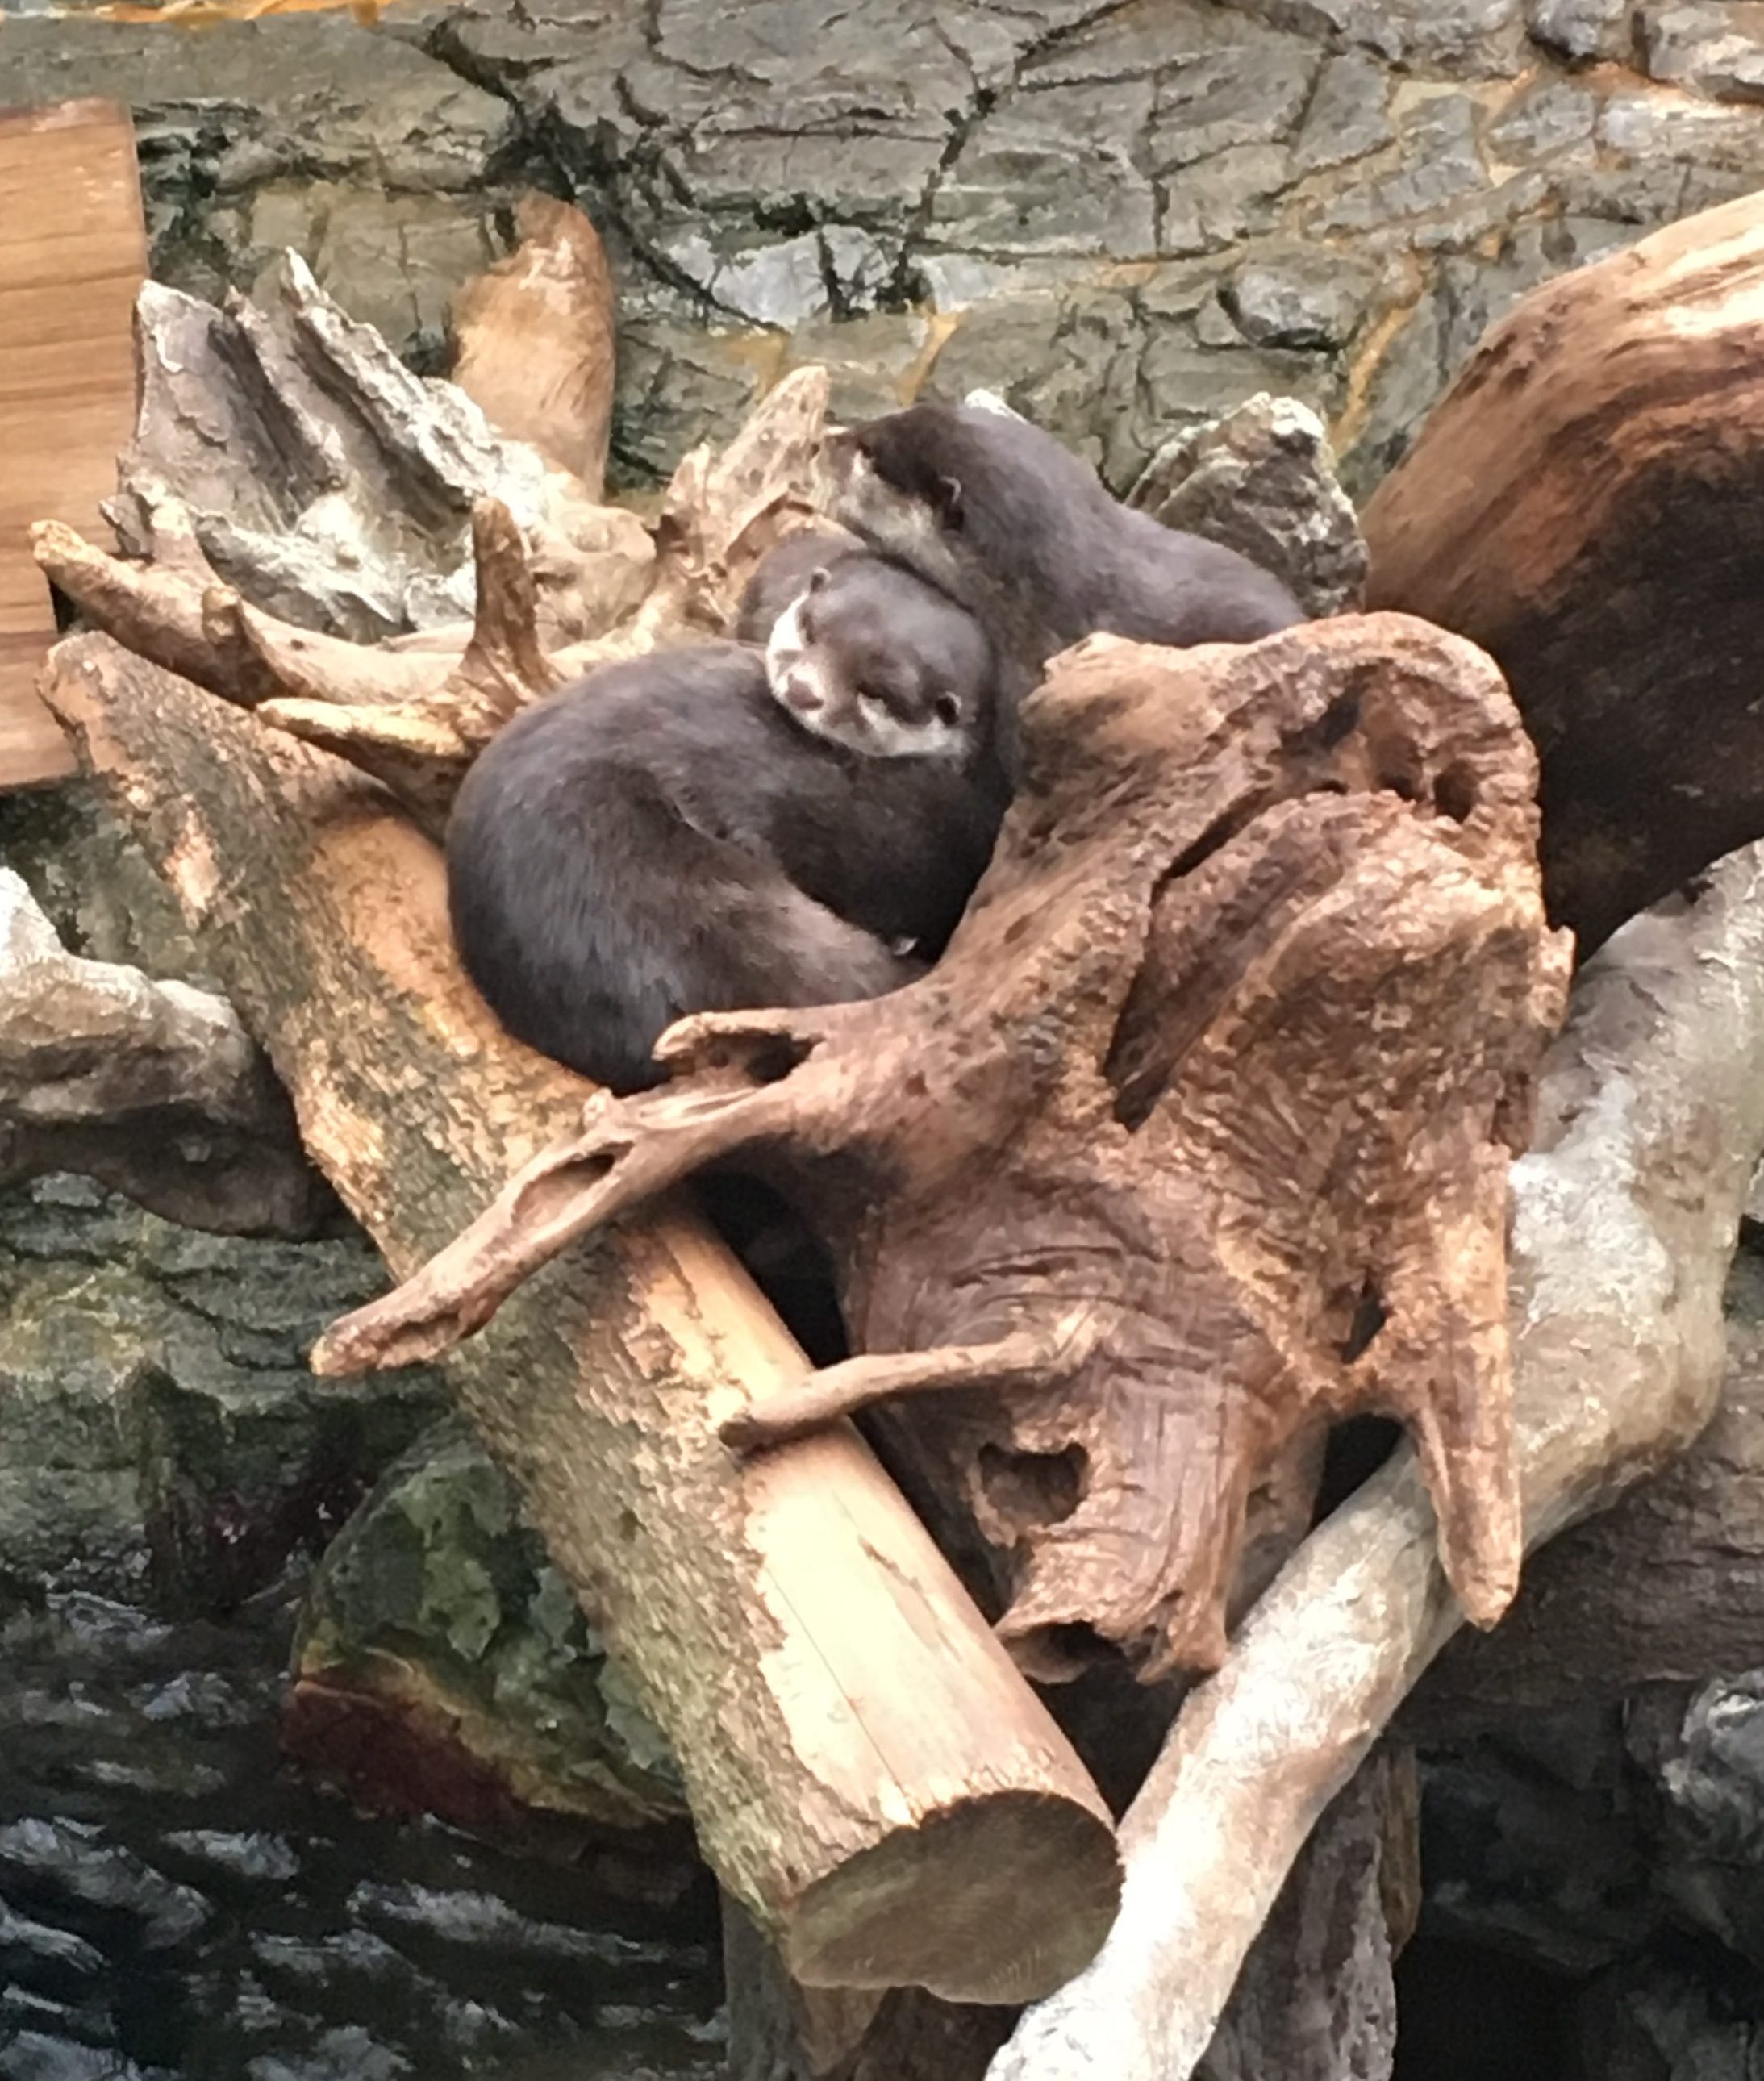 group of otters cuddled together on a pile of logs